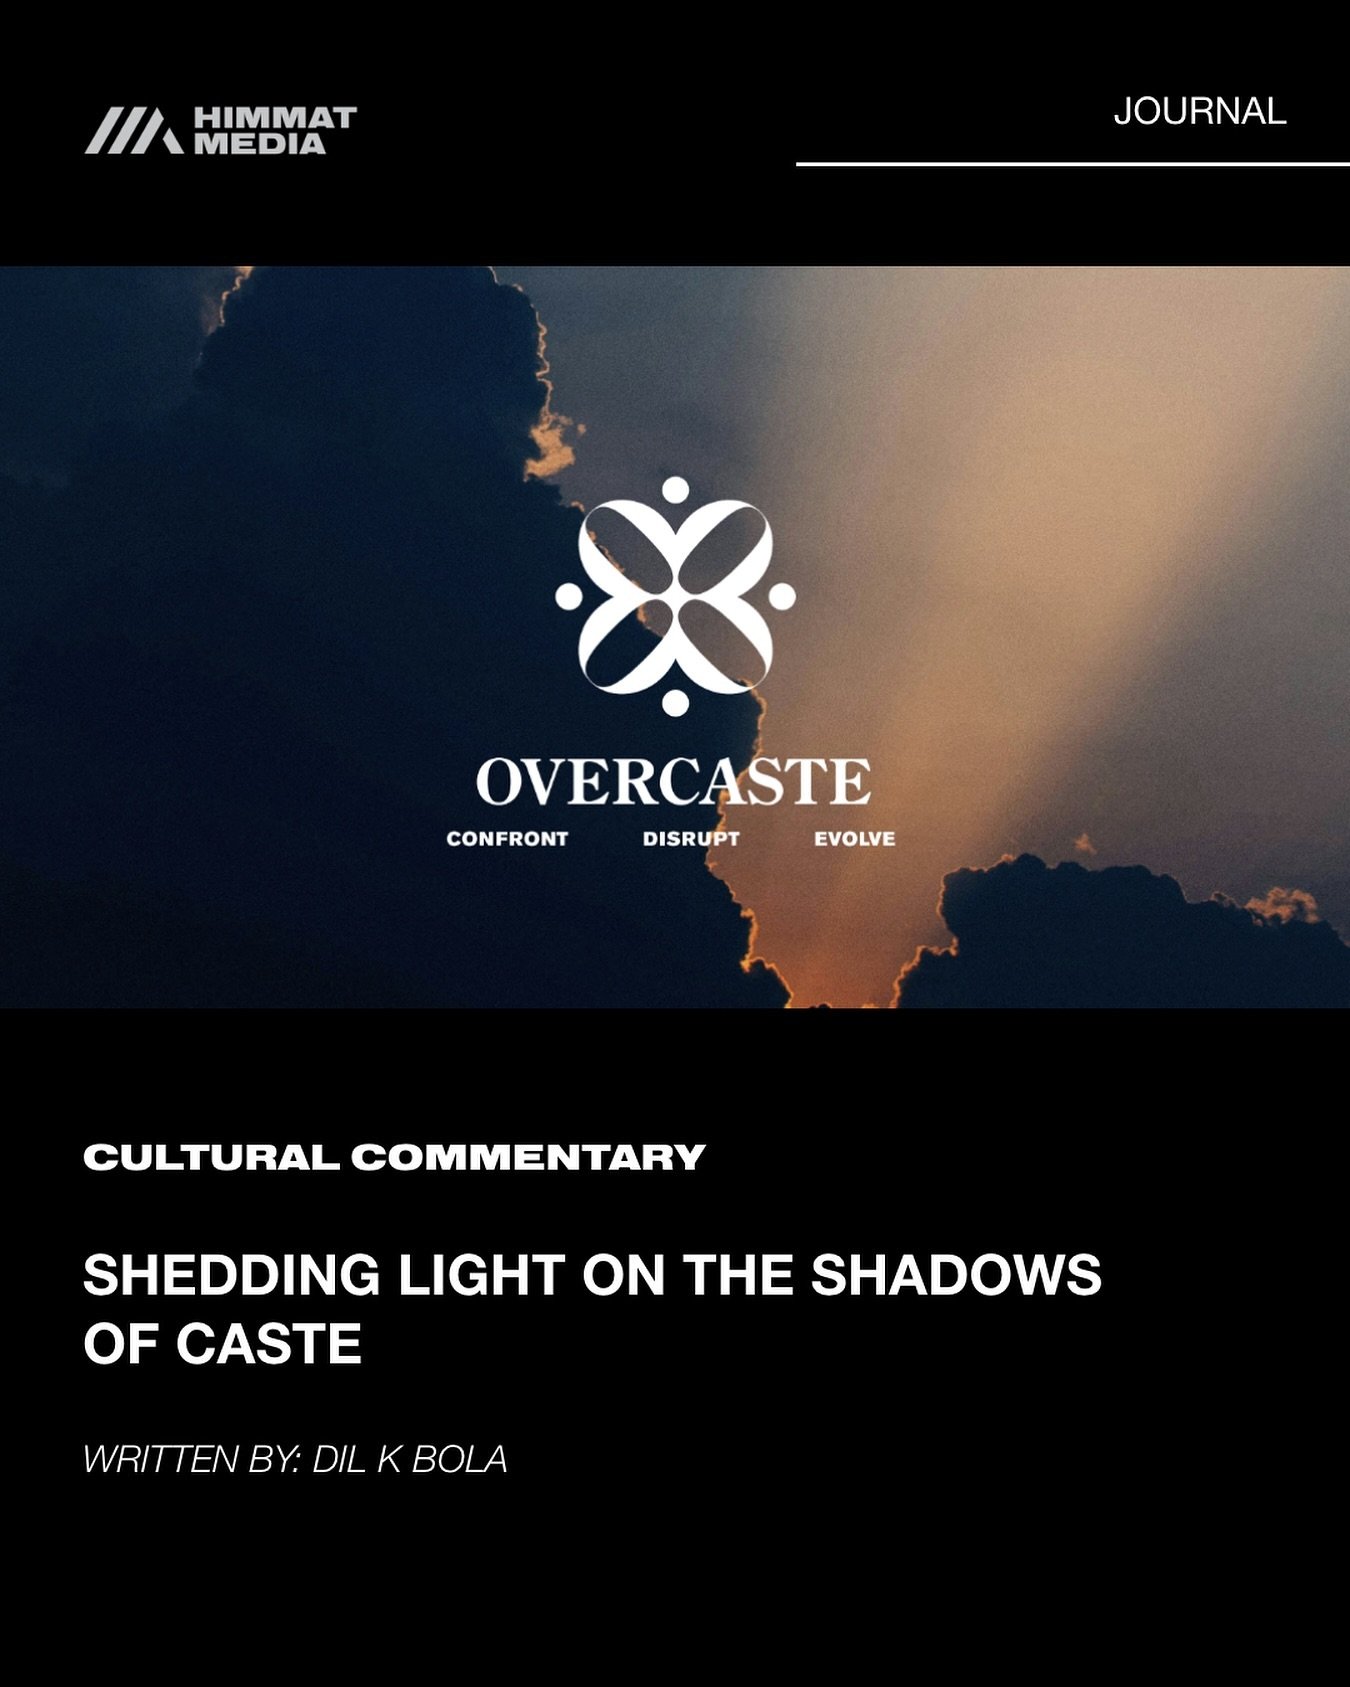 NEWEST ARTICLE: Shedding Light on the Shadows of Caste

Dive into the thought-provoking exploration of identity and inequality rooted in Poetic Justice Foundation&rsquo;s exhibit, Overcaste, with our newest resident writer, Dil Bola. 

Harnessing &ld